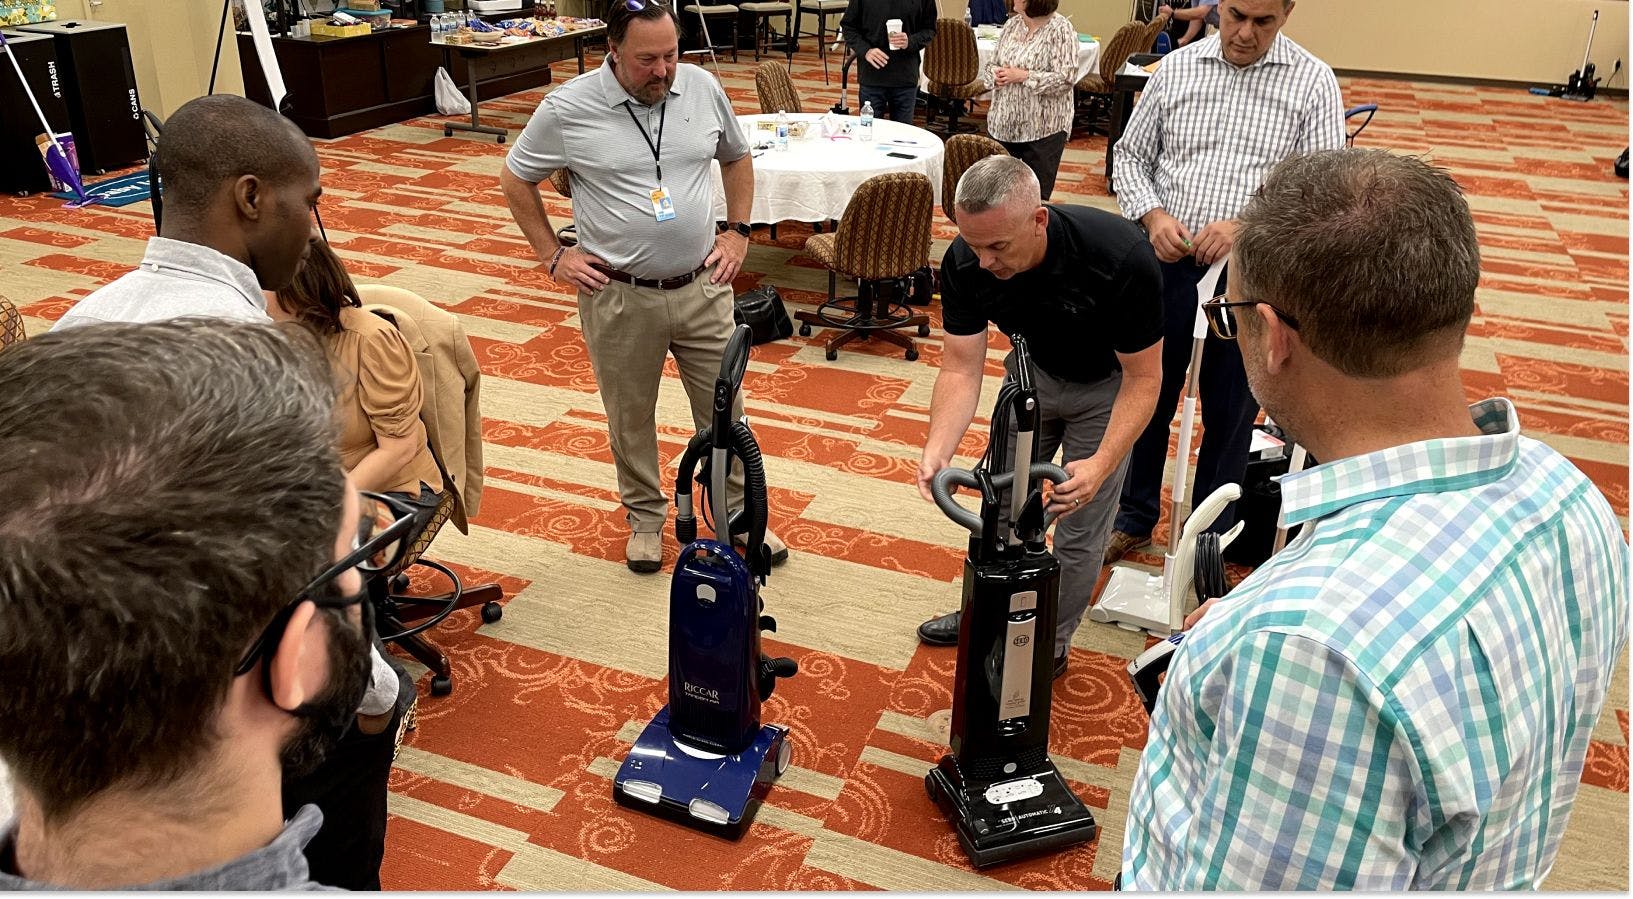 Presenting a vacuum to a group of people